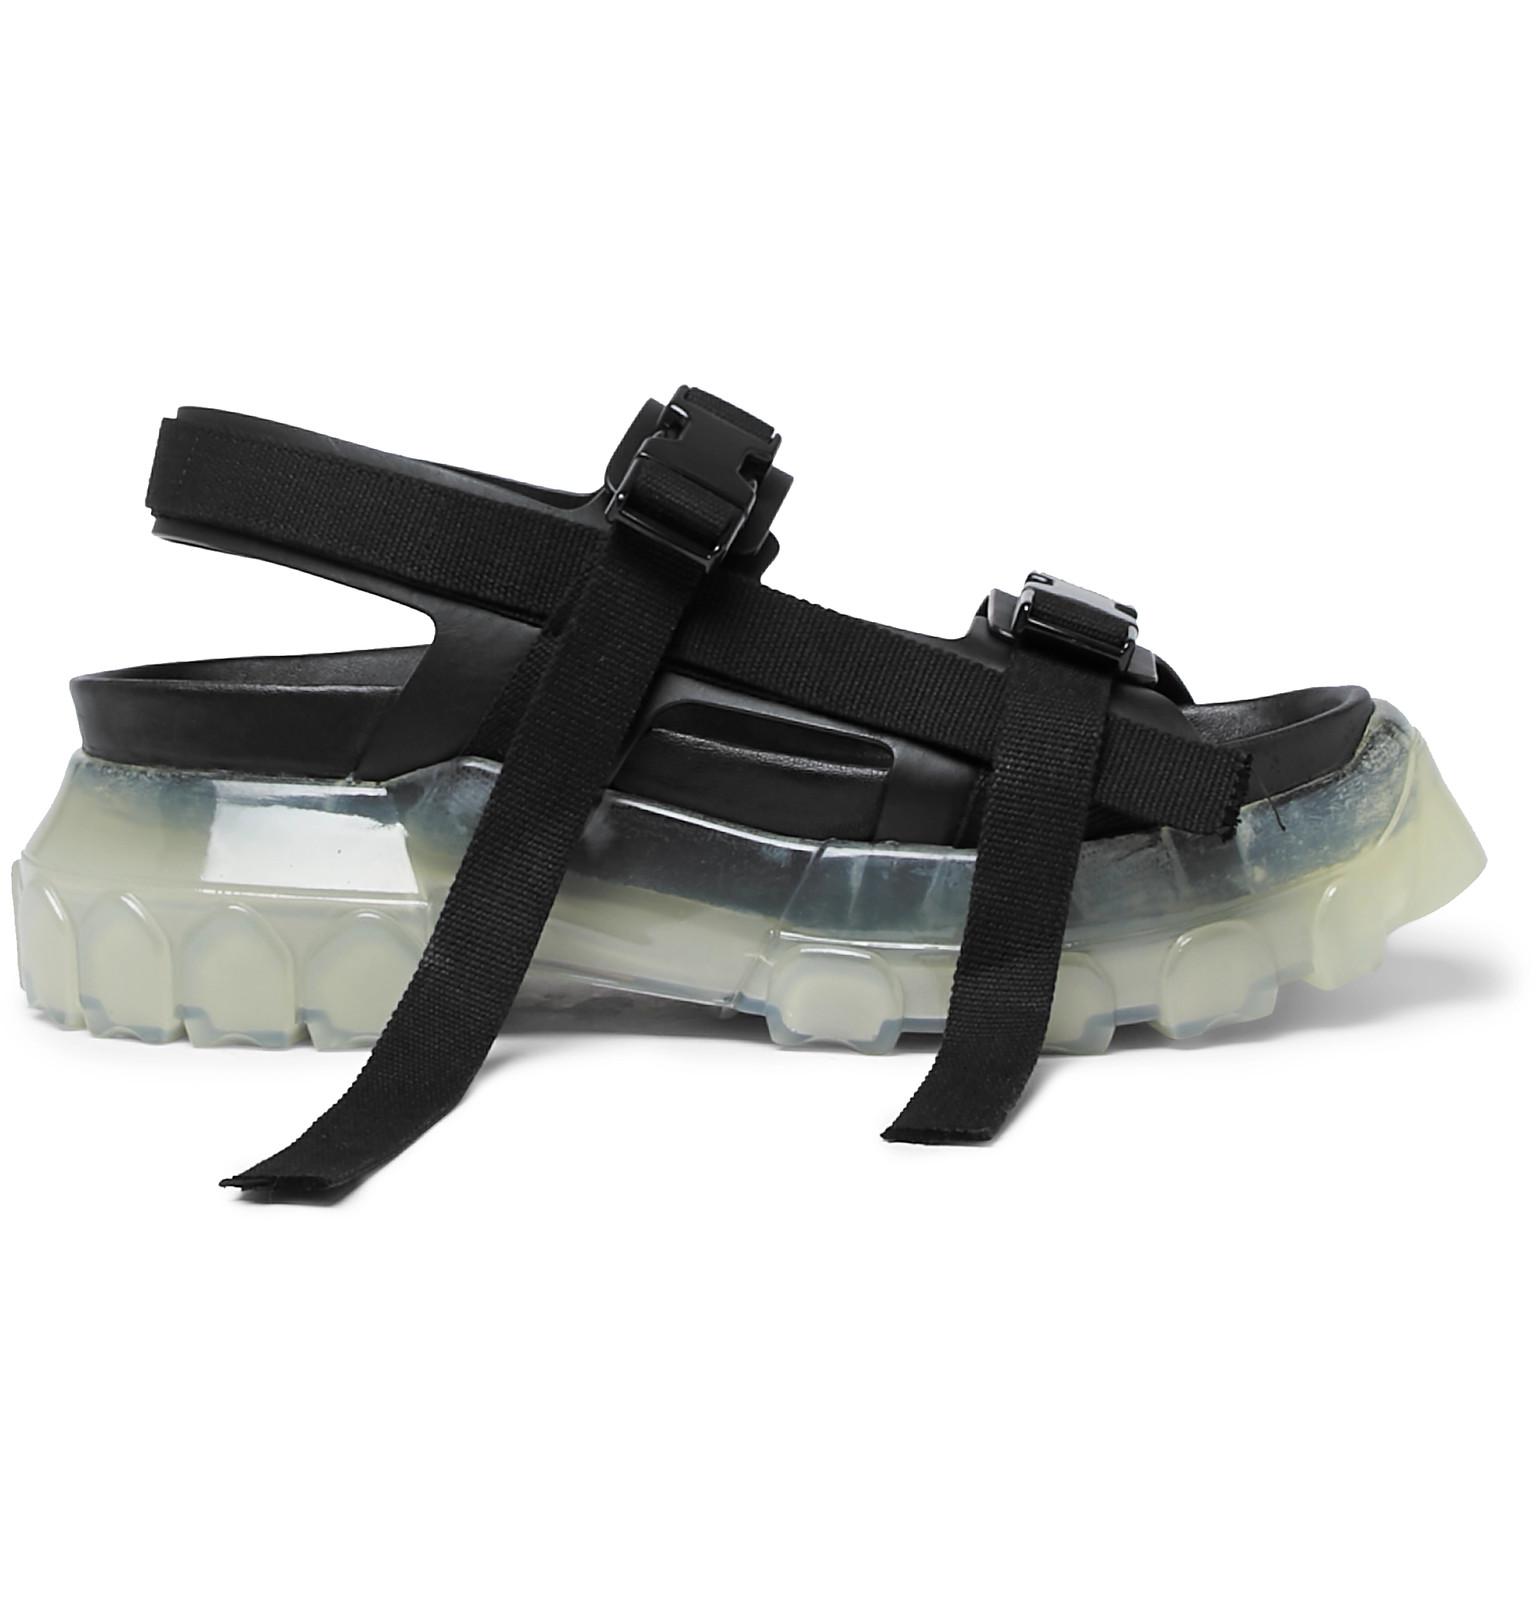 Rick Owens Leather Tractor Sandal in Black for Men - Lyst